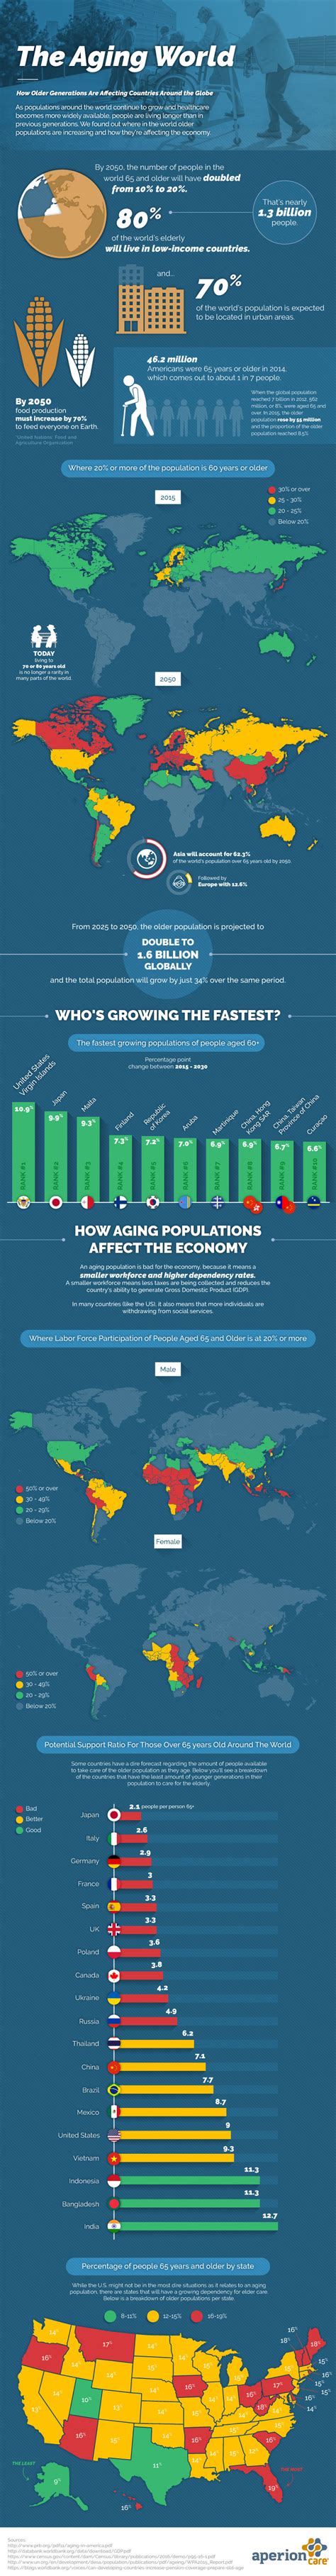 In 2010, the aging index ranged from 22.8% among the bumiputera (malays and other indigenous groups), to 31.4% among the indians and 55.0% among the chinese. The Aging World - Infographic about global aging